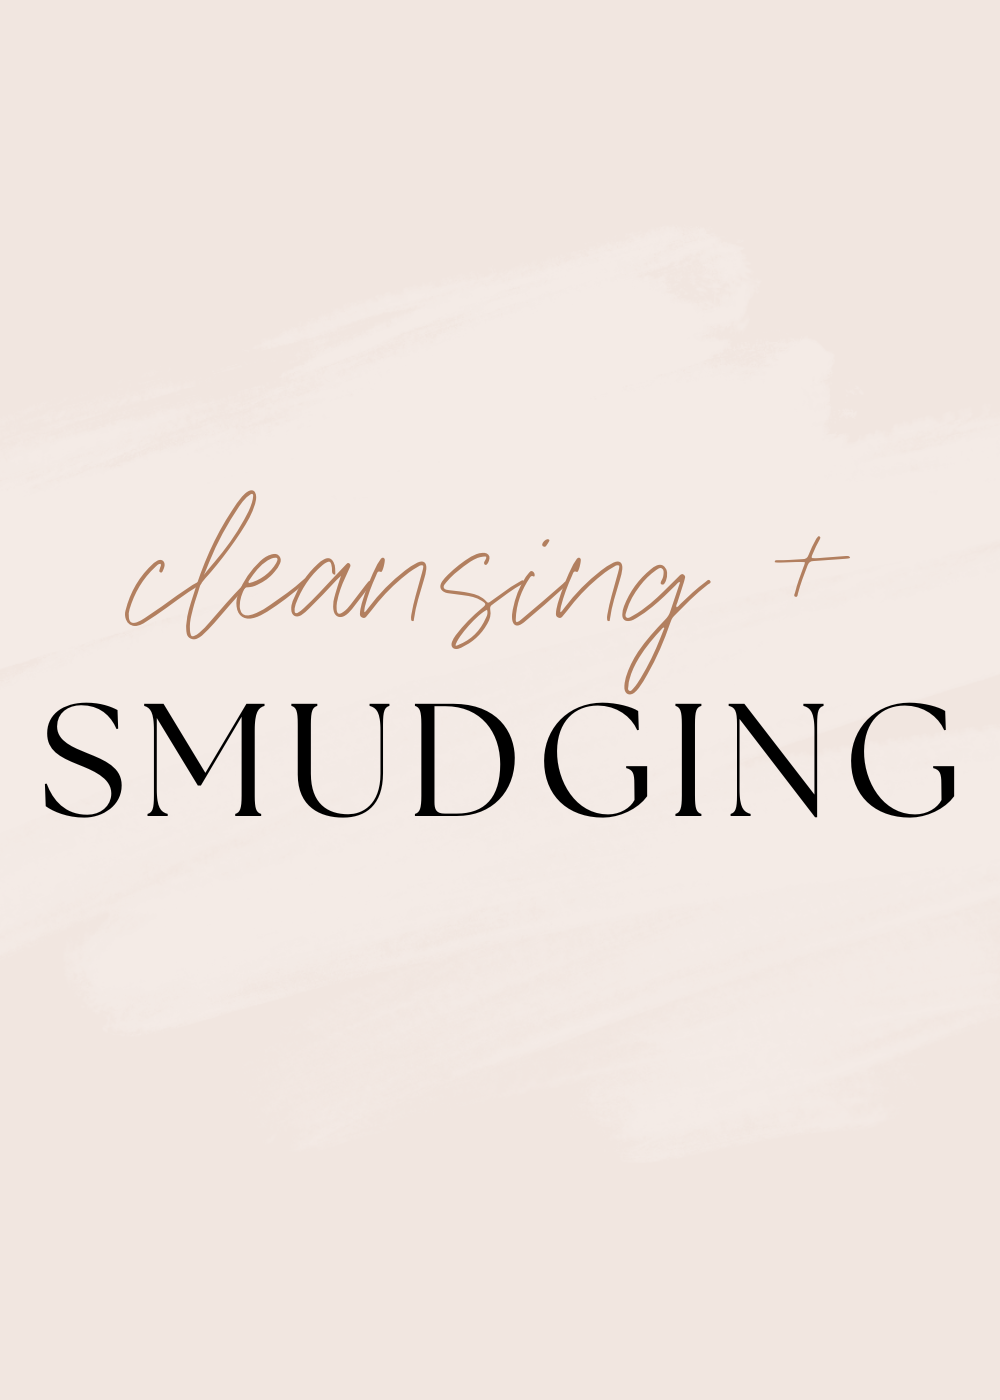 CLEANSING & SMUDGING